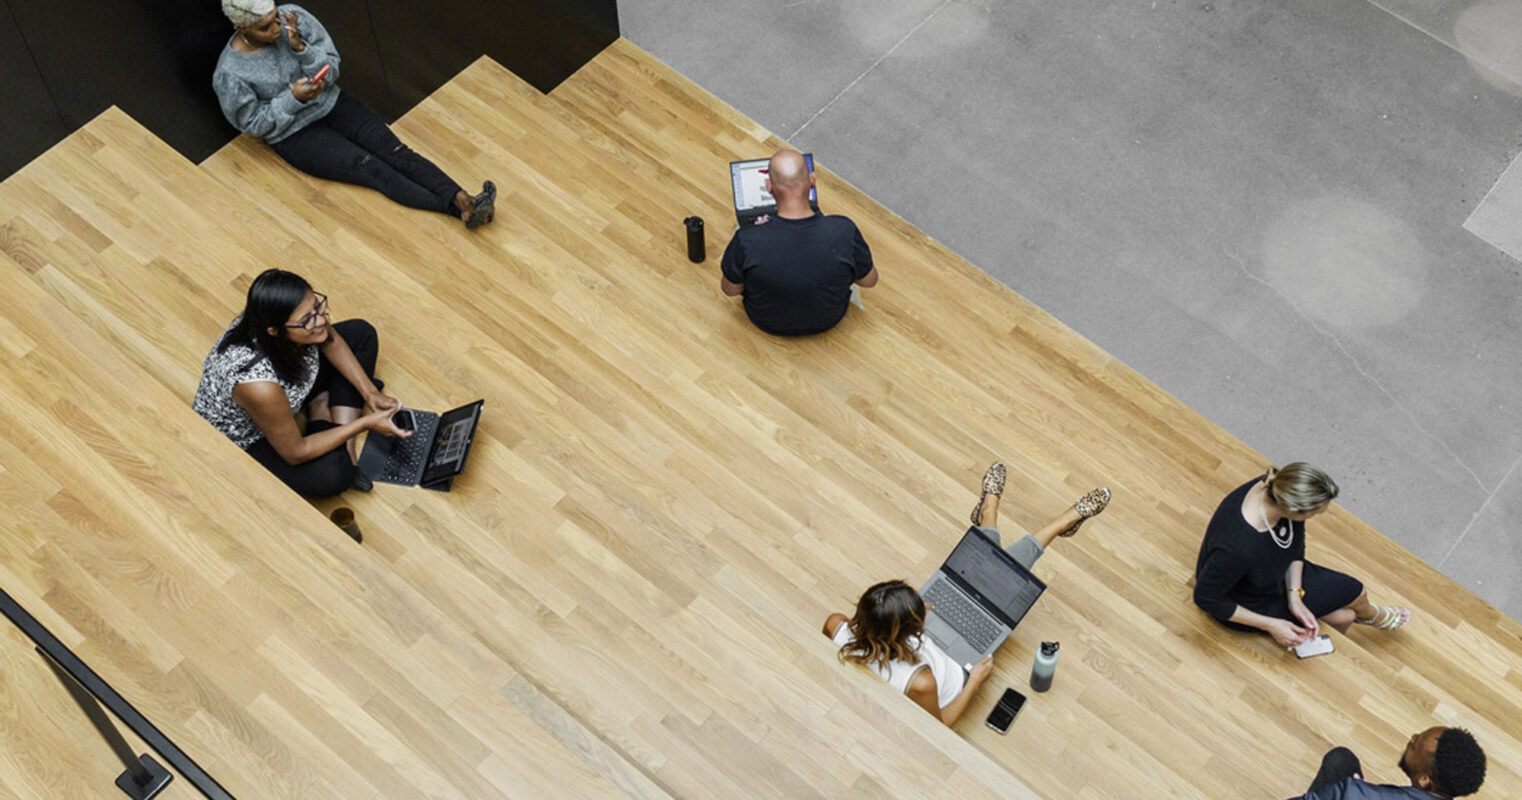 Overhead view of a modern office space featuring staggered wooden steps doubling as seating and work areas, with people engrossed in their laptops and mobile devices, highlighting flexible design and communal working environments.